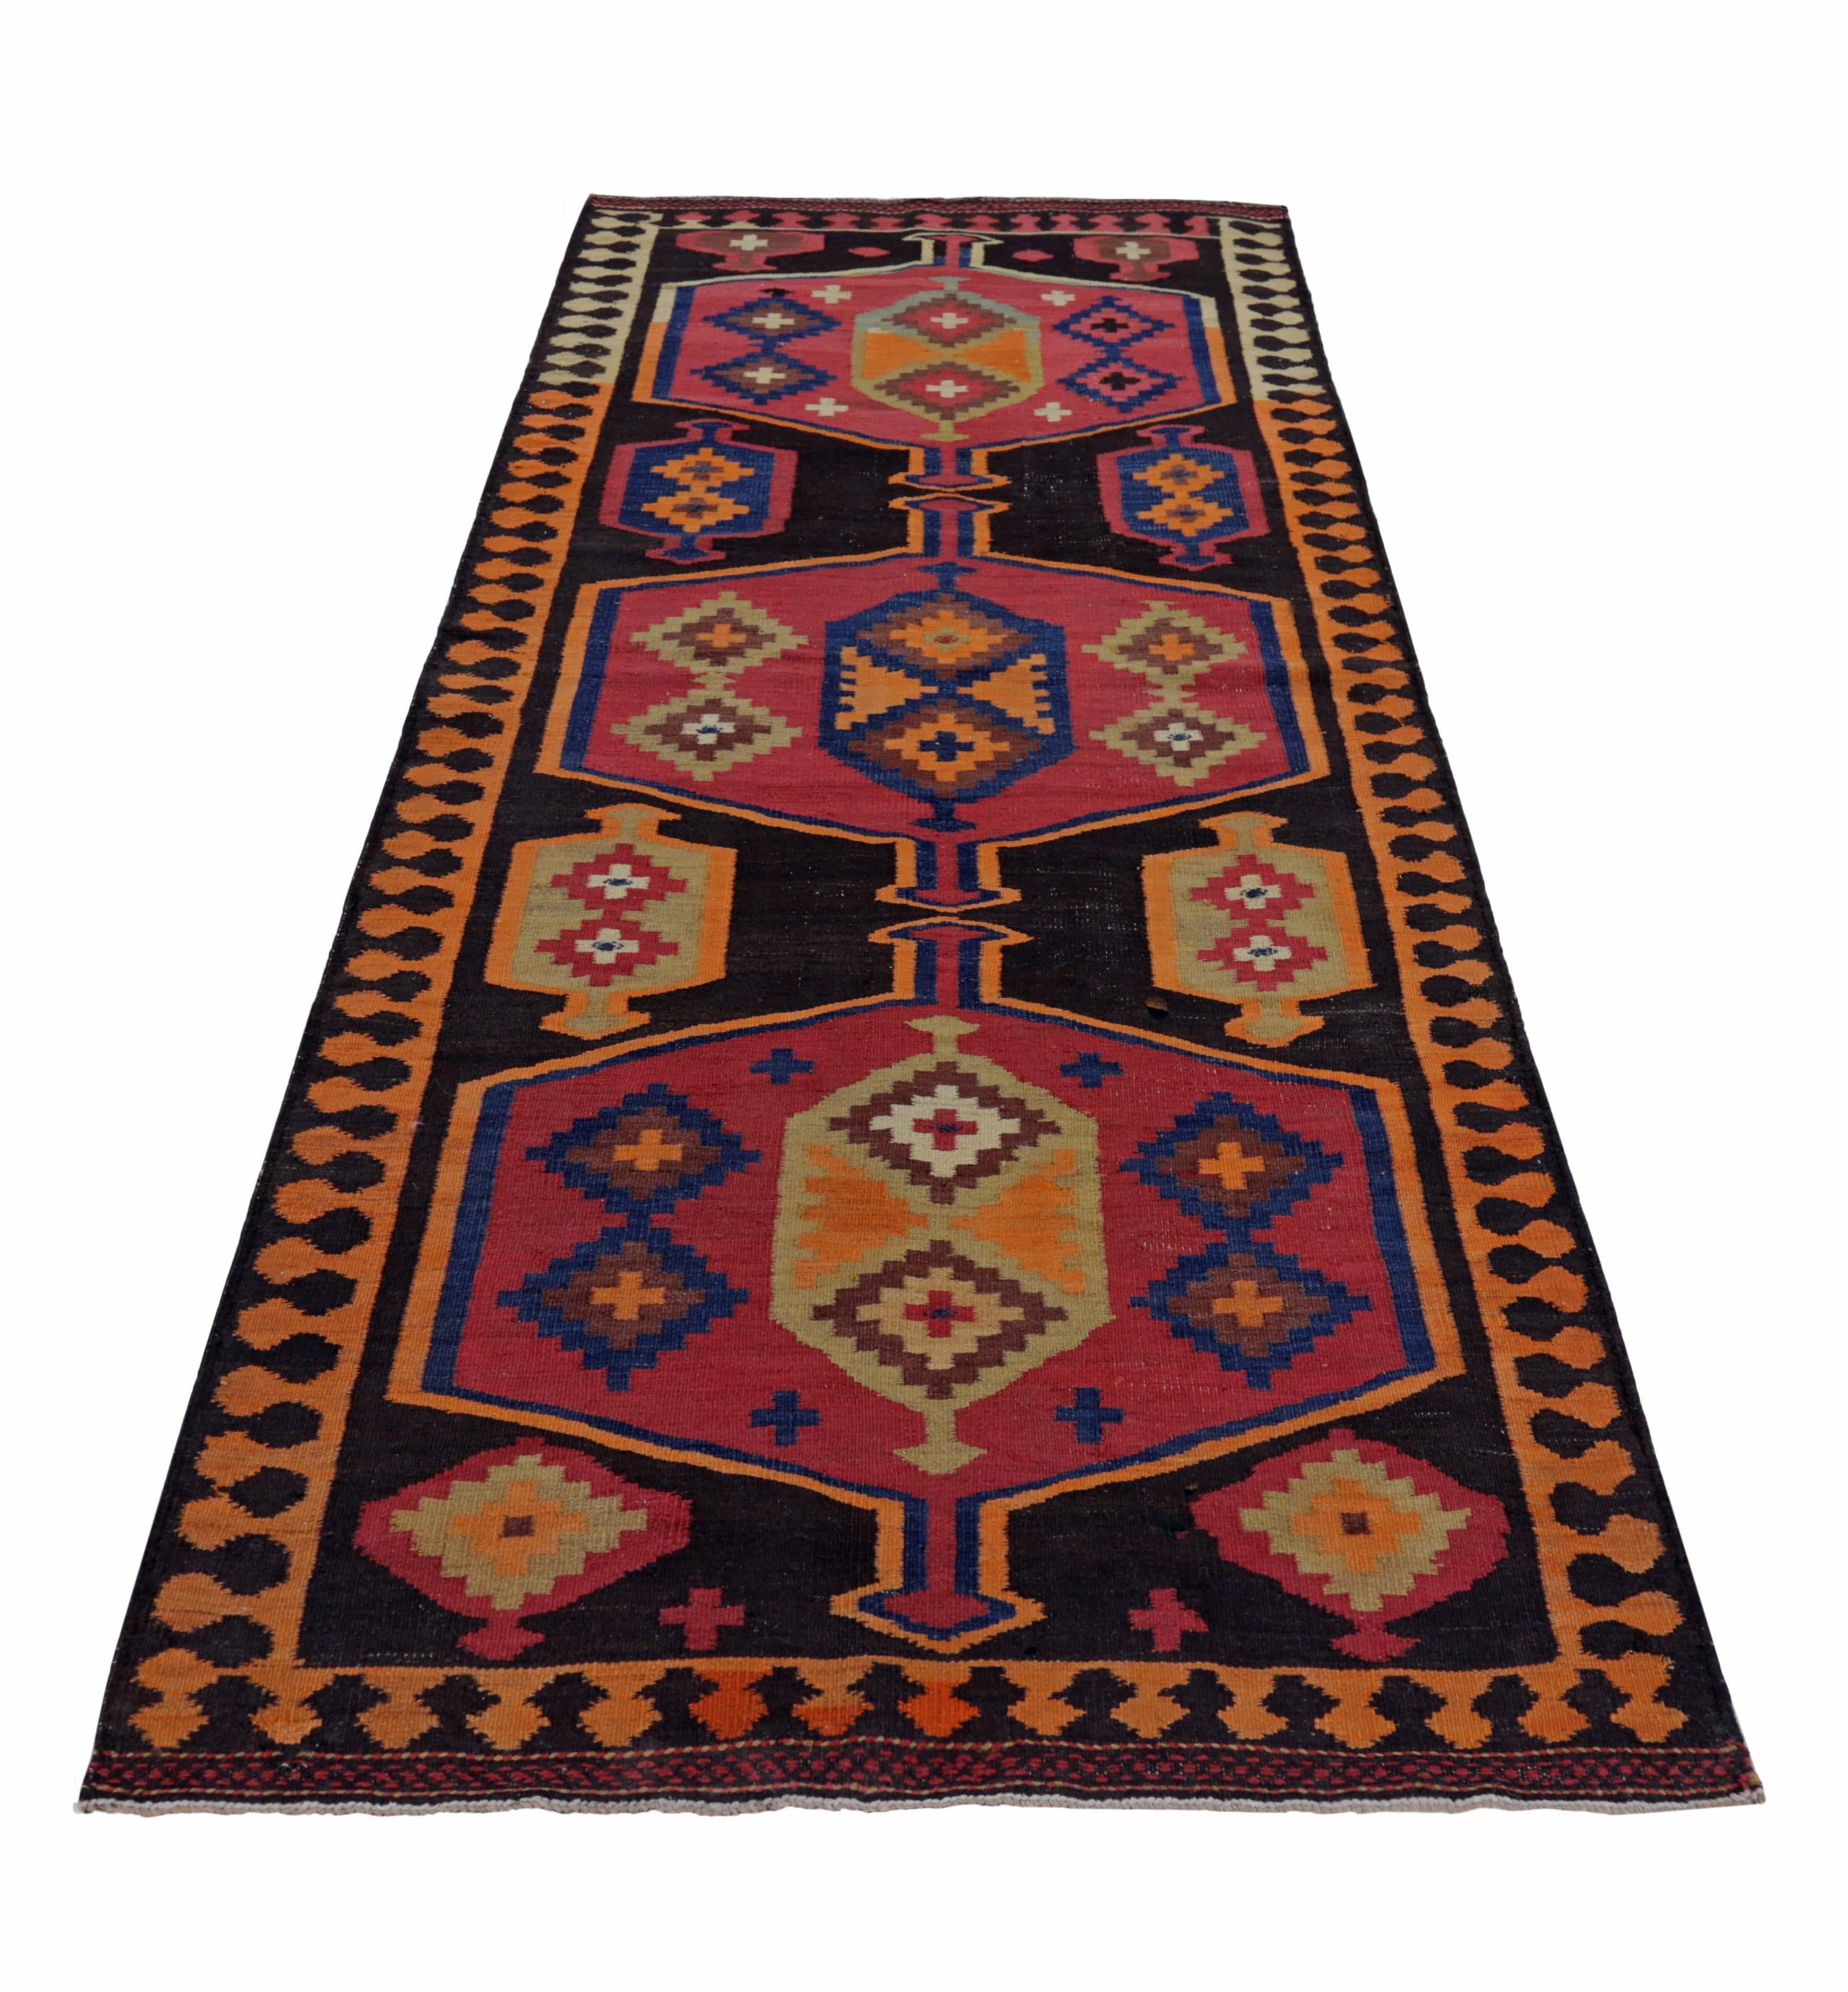 Turkish runner rug handwoven from the finest sheep’s wool and colored with all-natural vegetable dyes that are safe for humans and pets. It’s a traditional Kilim flat-weave design featuring red, orange, and black tribal details. It’s a stunning